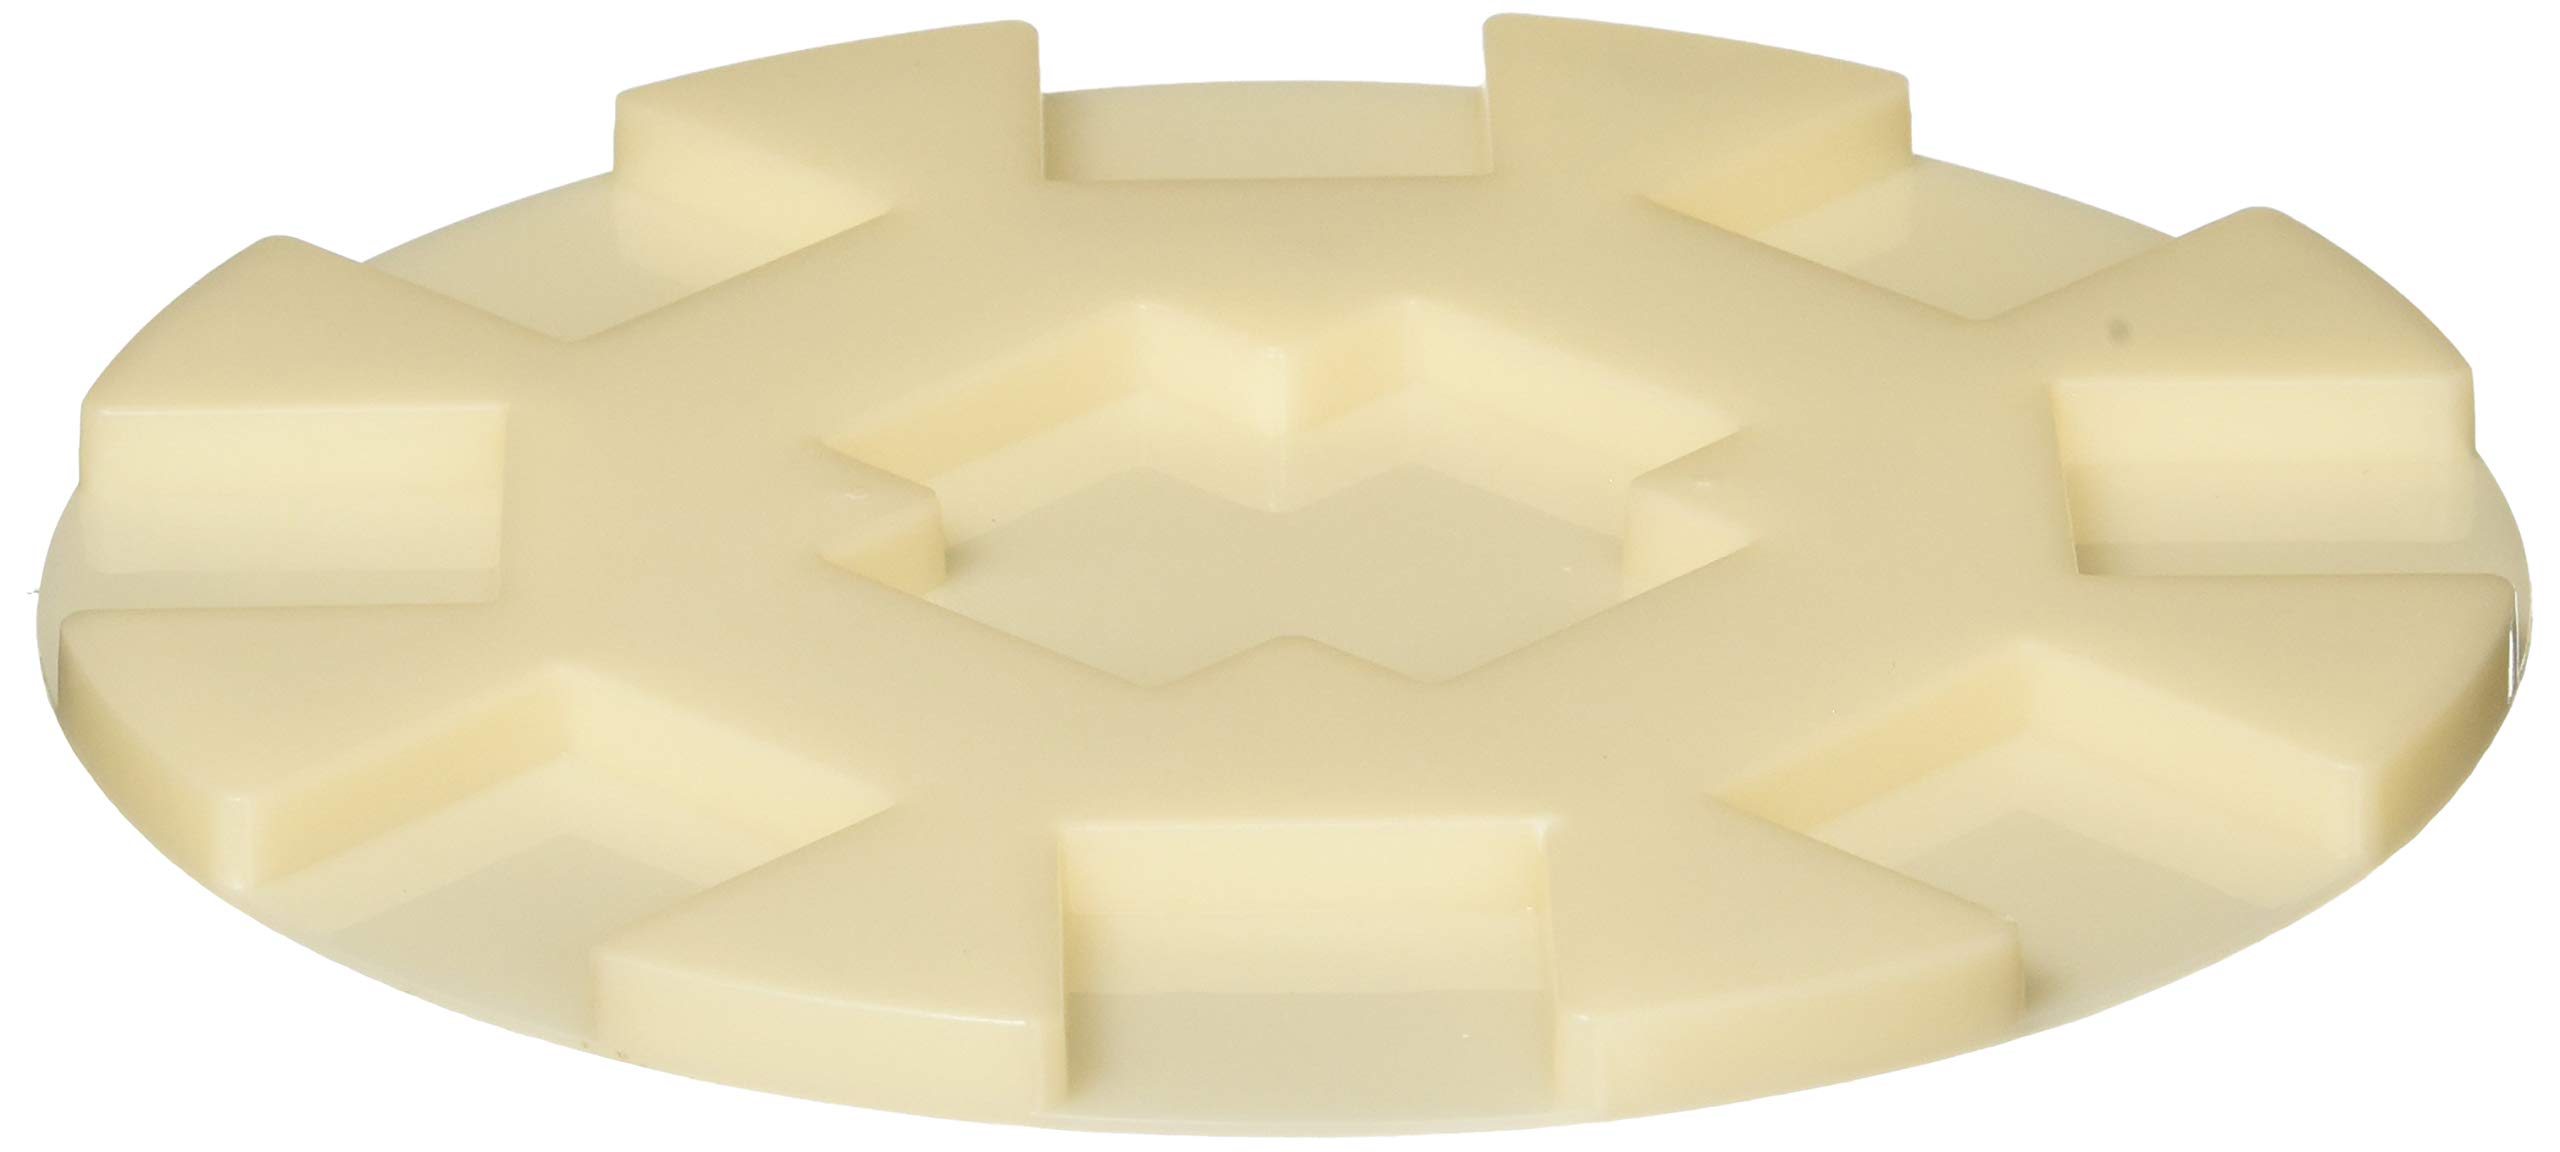 Plastic Mexican Train Hub Round Tile Recreational Game Activity